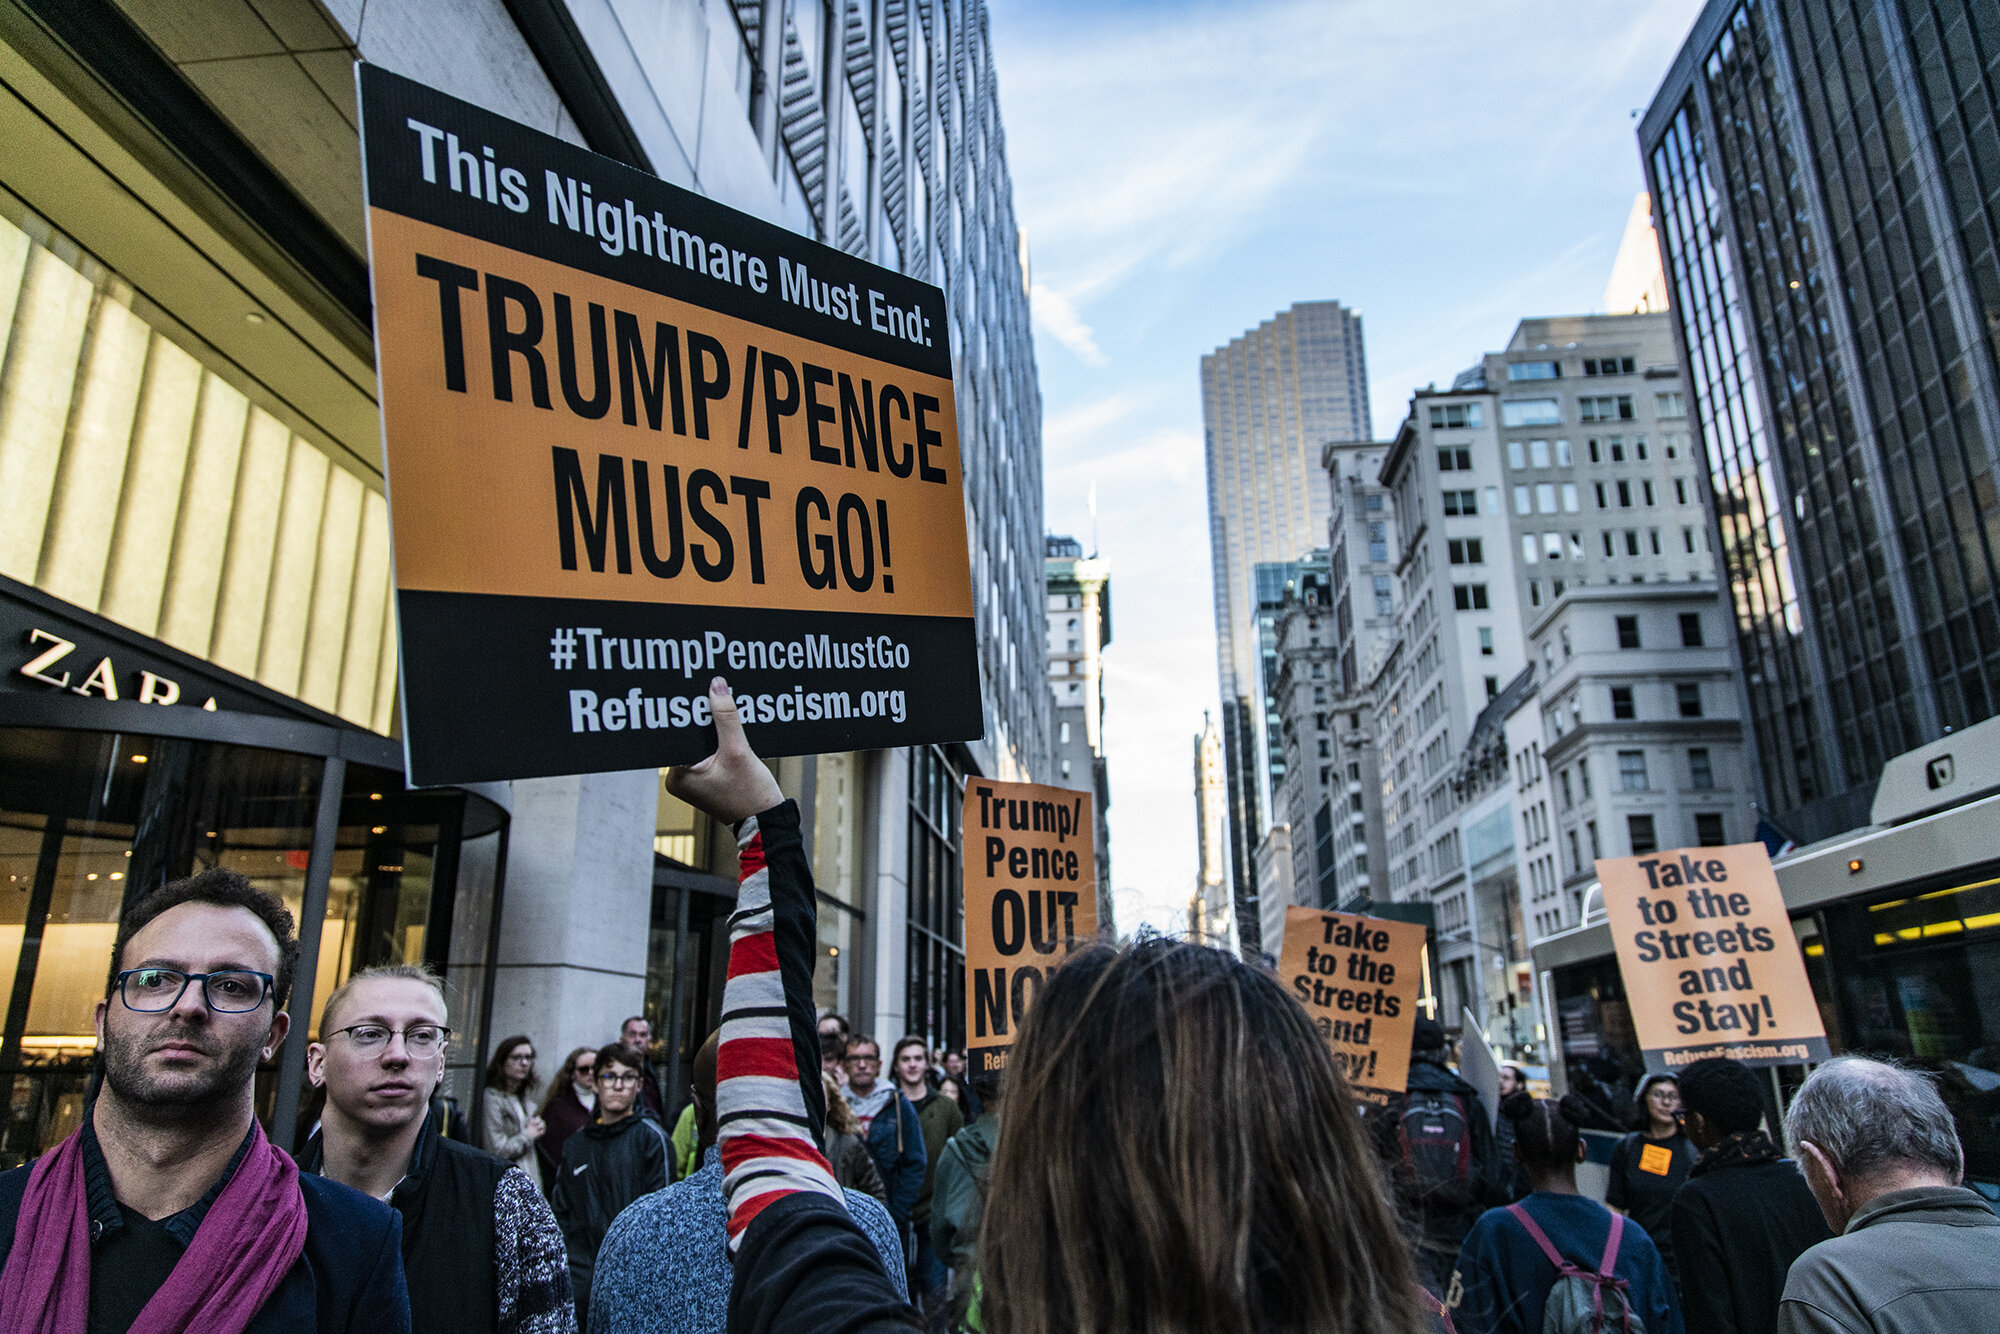 OUTNOW_Protest_2019_NYC-2533.jpg